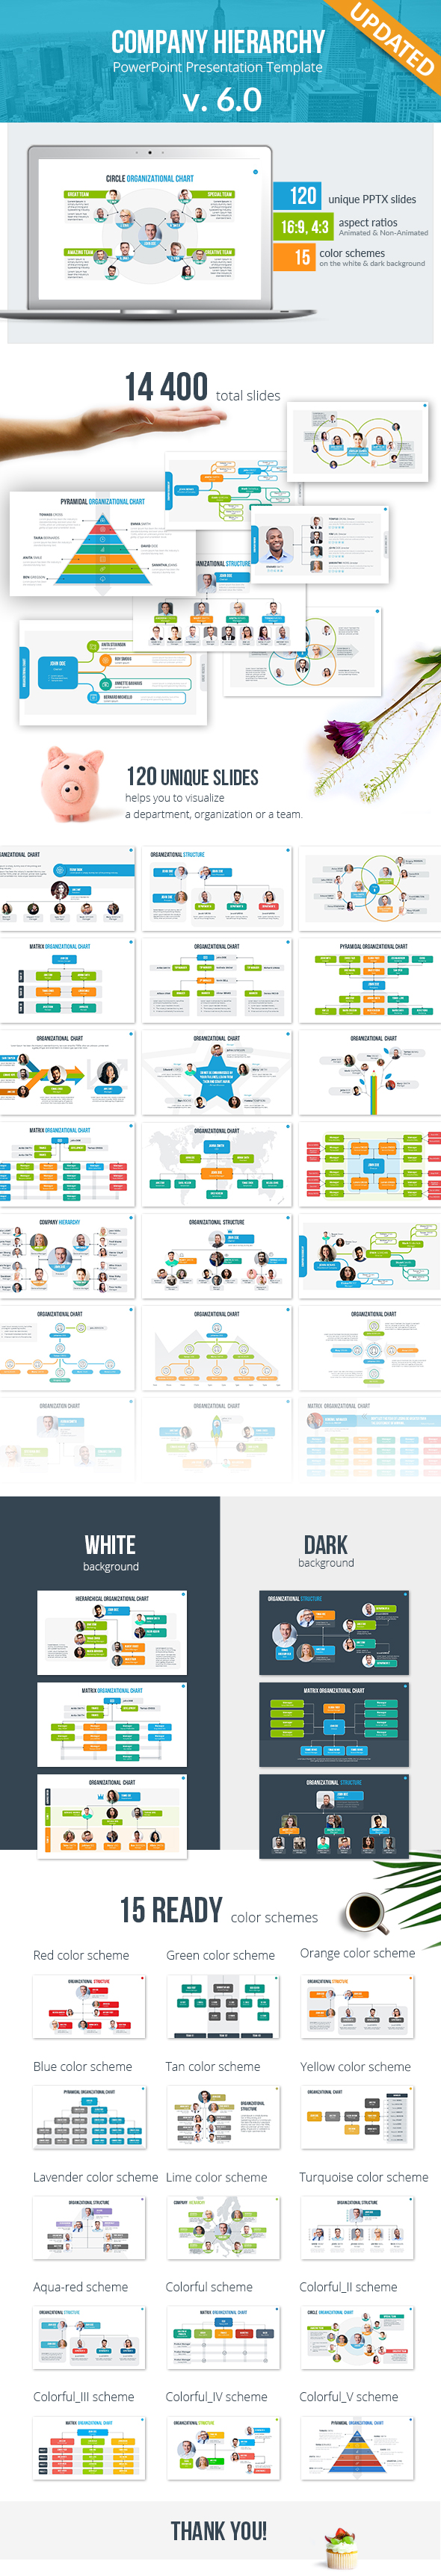 Organizational Chart and Hierarchy PowerPoint Presentation Template